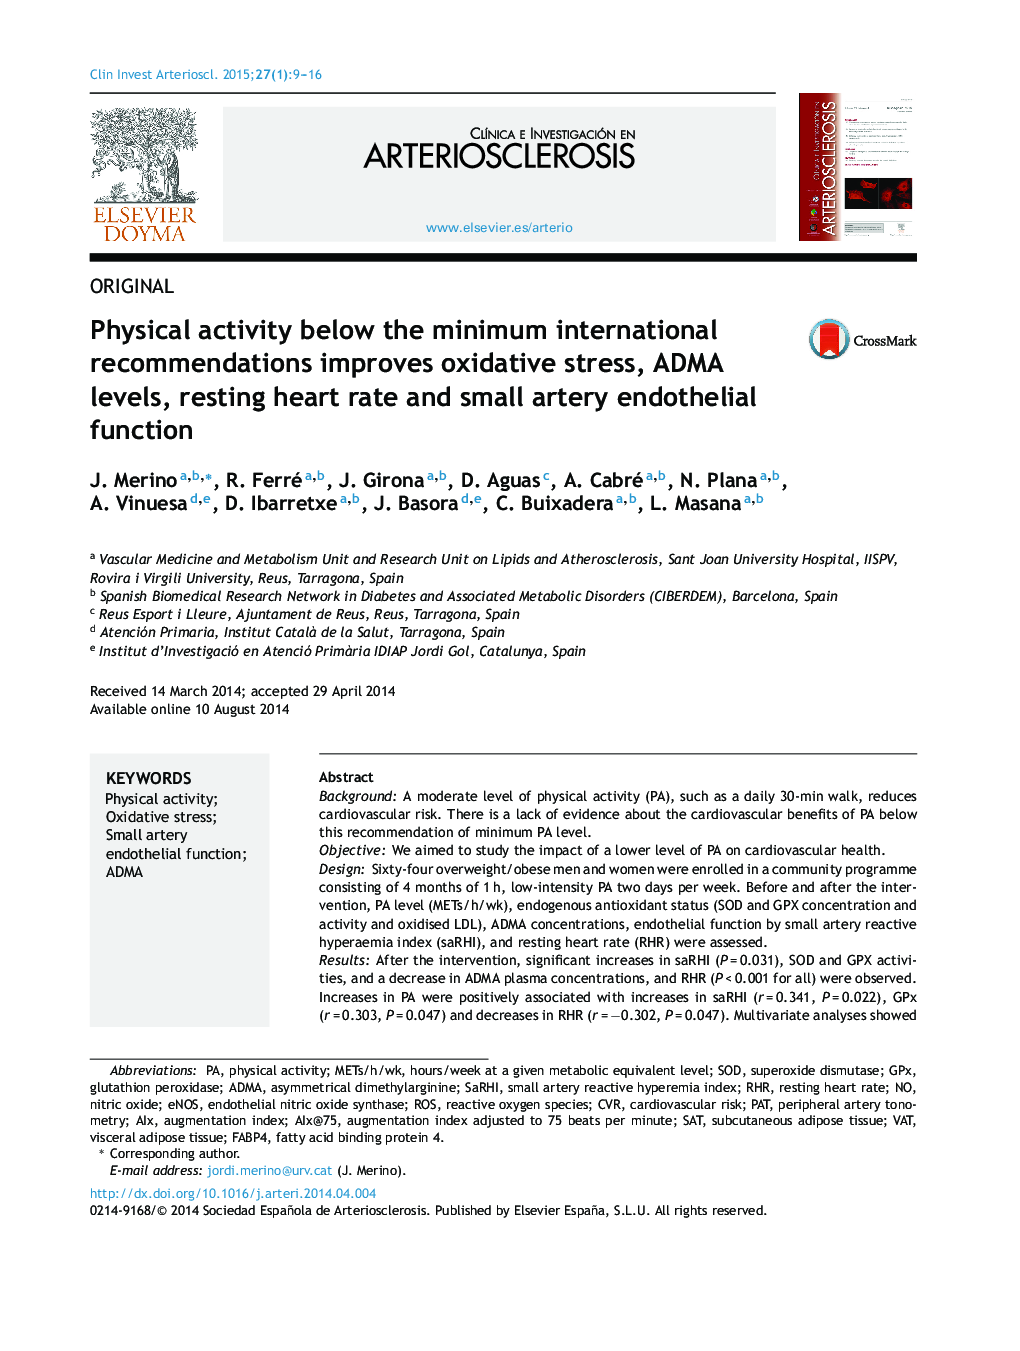 Physical activity below the minimum international recommendations improves oxidative stress, ADMA levels, resting heart rate and small artery endothelial function